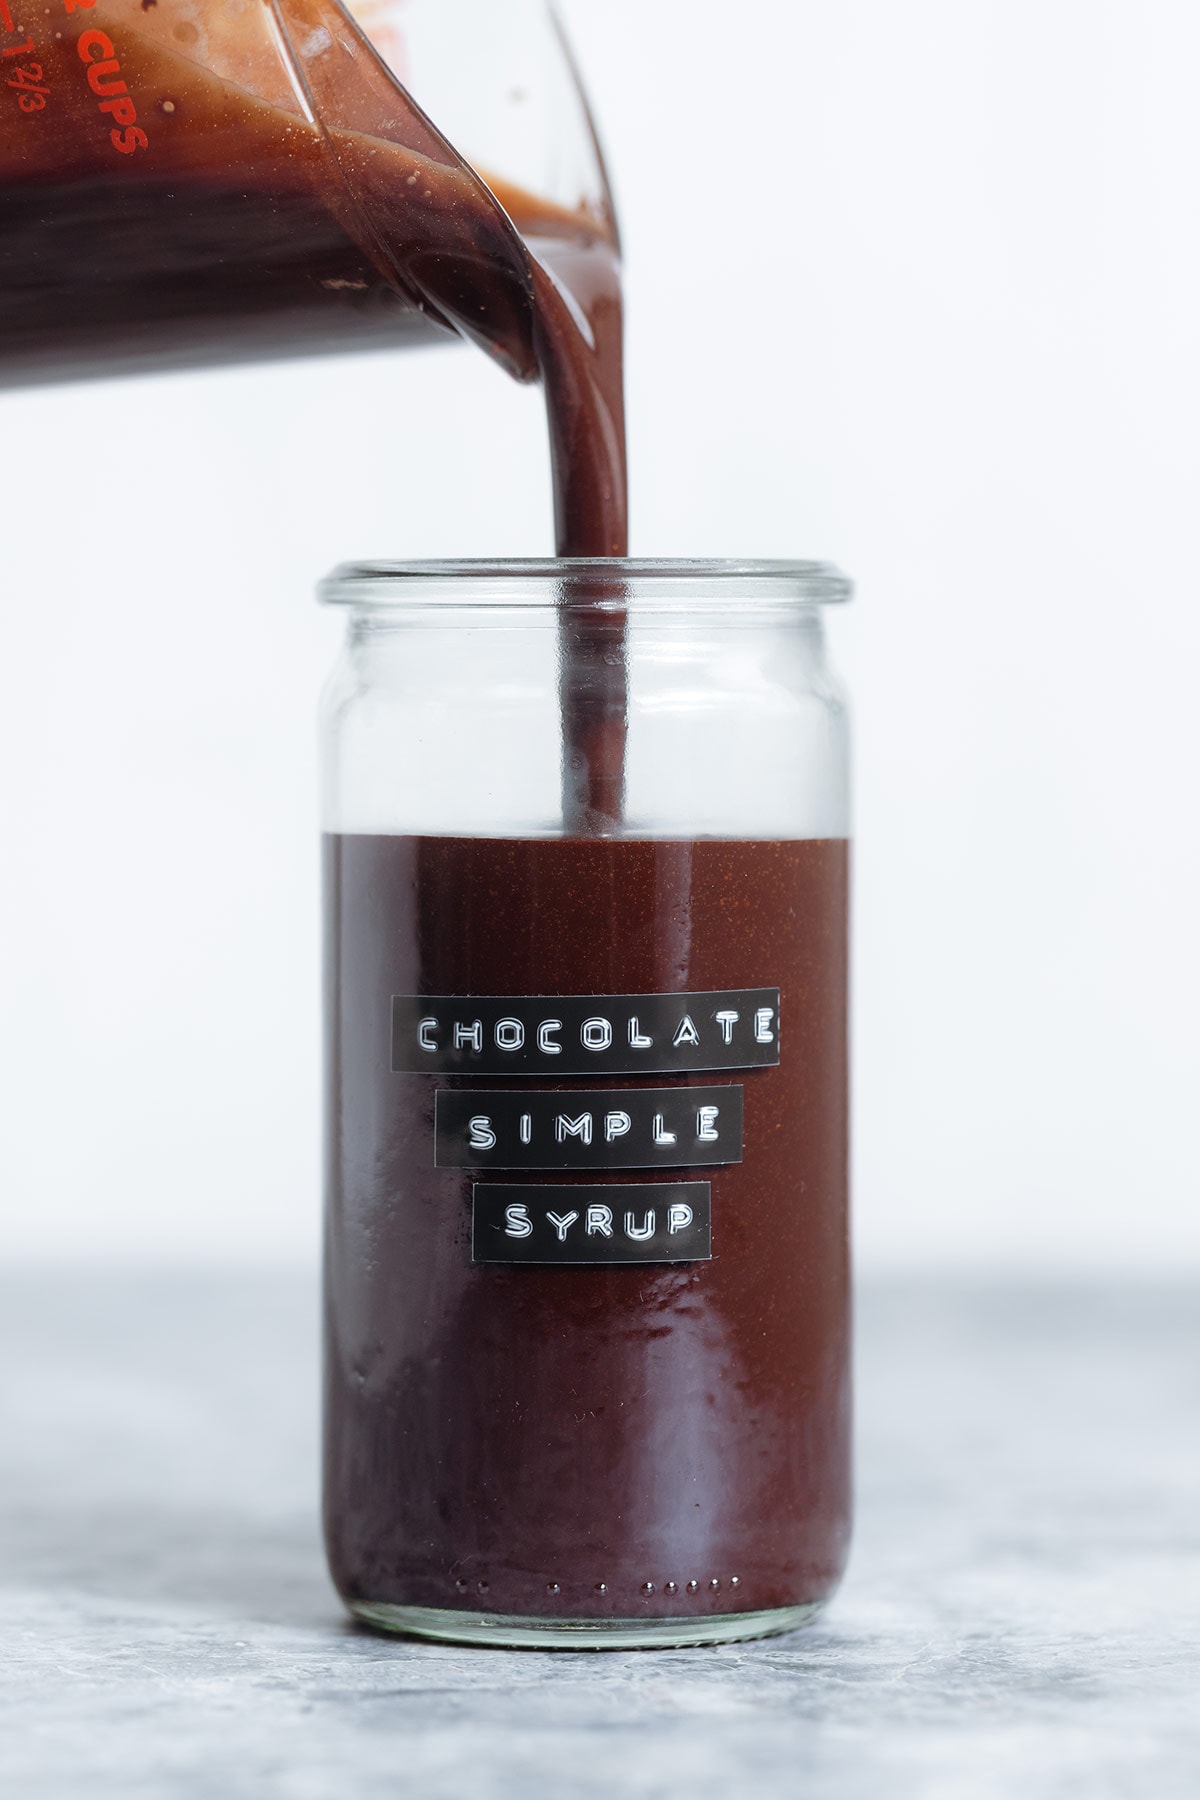 Chocolate syrup being poured into a medium glass jar with a black and white embossed label, on a white background.